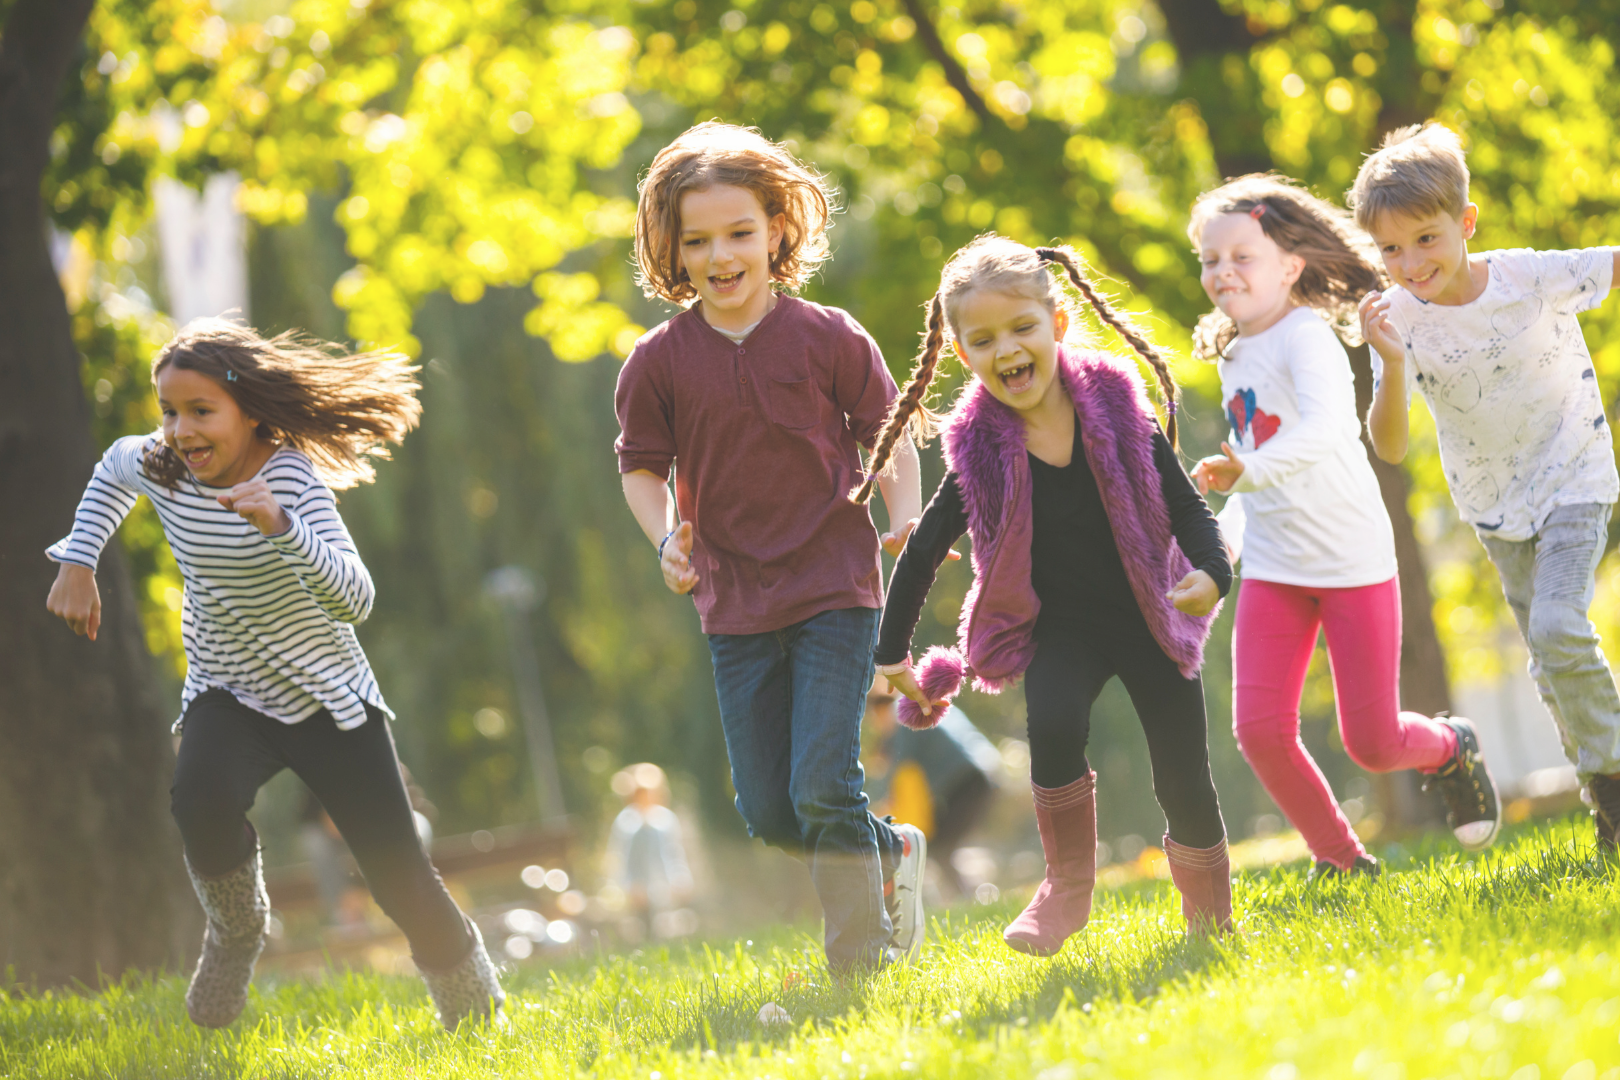 Children with Celiac Disease and other food issues can have happy, healthy lives.